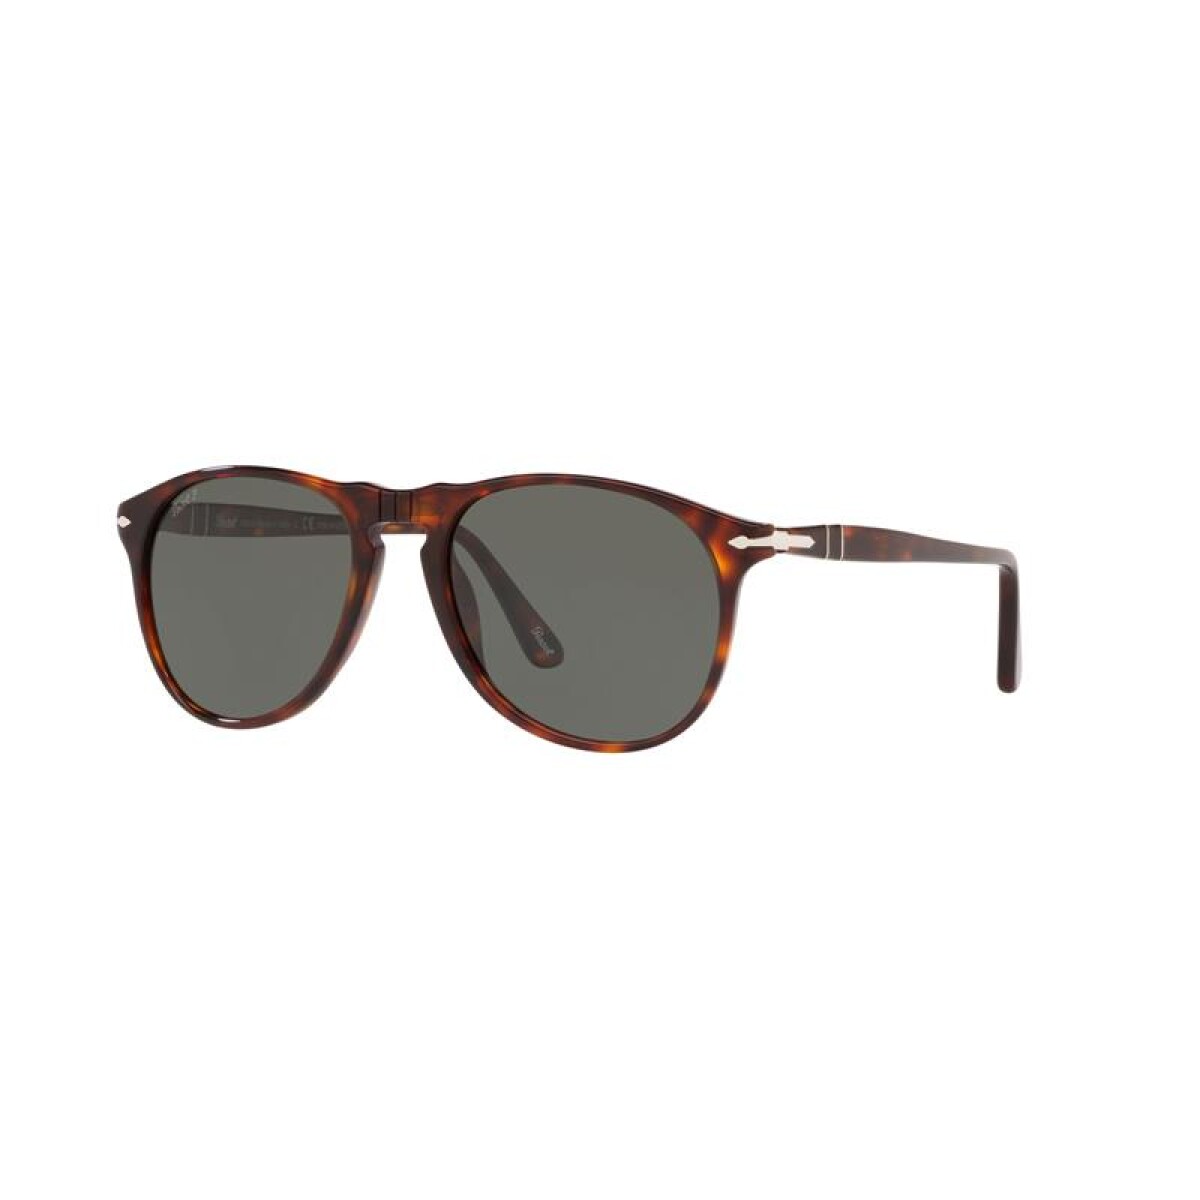 Persol 9649-s - 24/58 